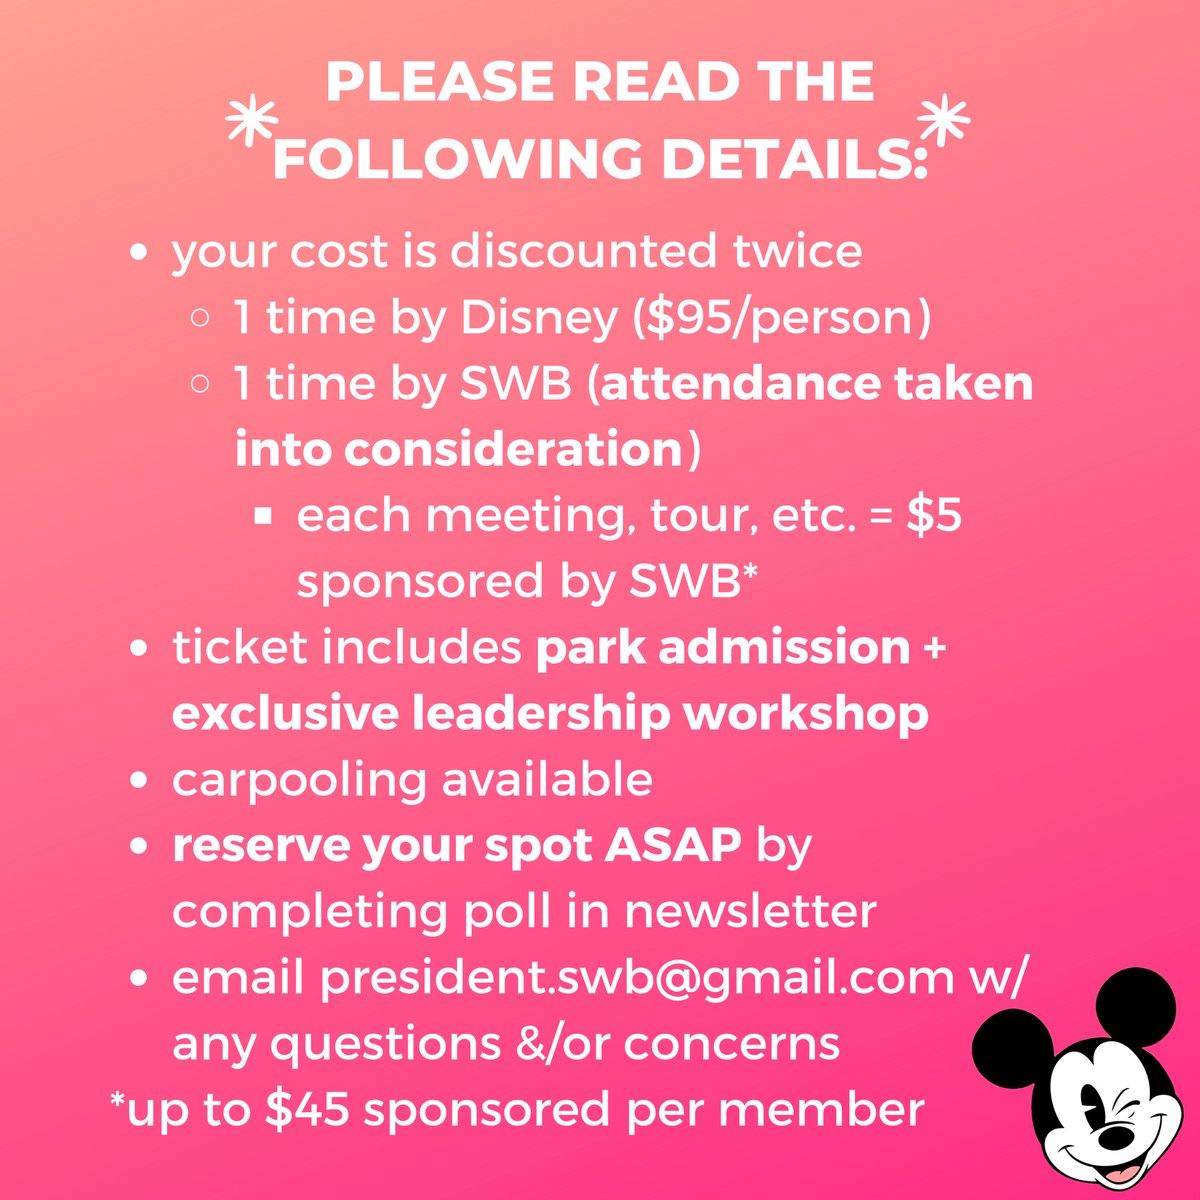 Don’t forget to RSVP for our Disney Leadership Event! If you have any questions or concerns, please email president.swb@gmail.com

#csulb #csulbswb #gobeach #societyofwomeninbusiness #swb #girlboss #strongwomen #girlpower #disneyleadership @Disneyland